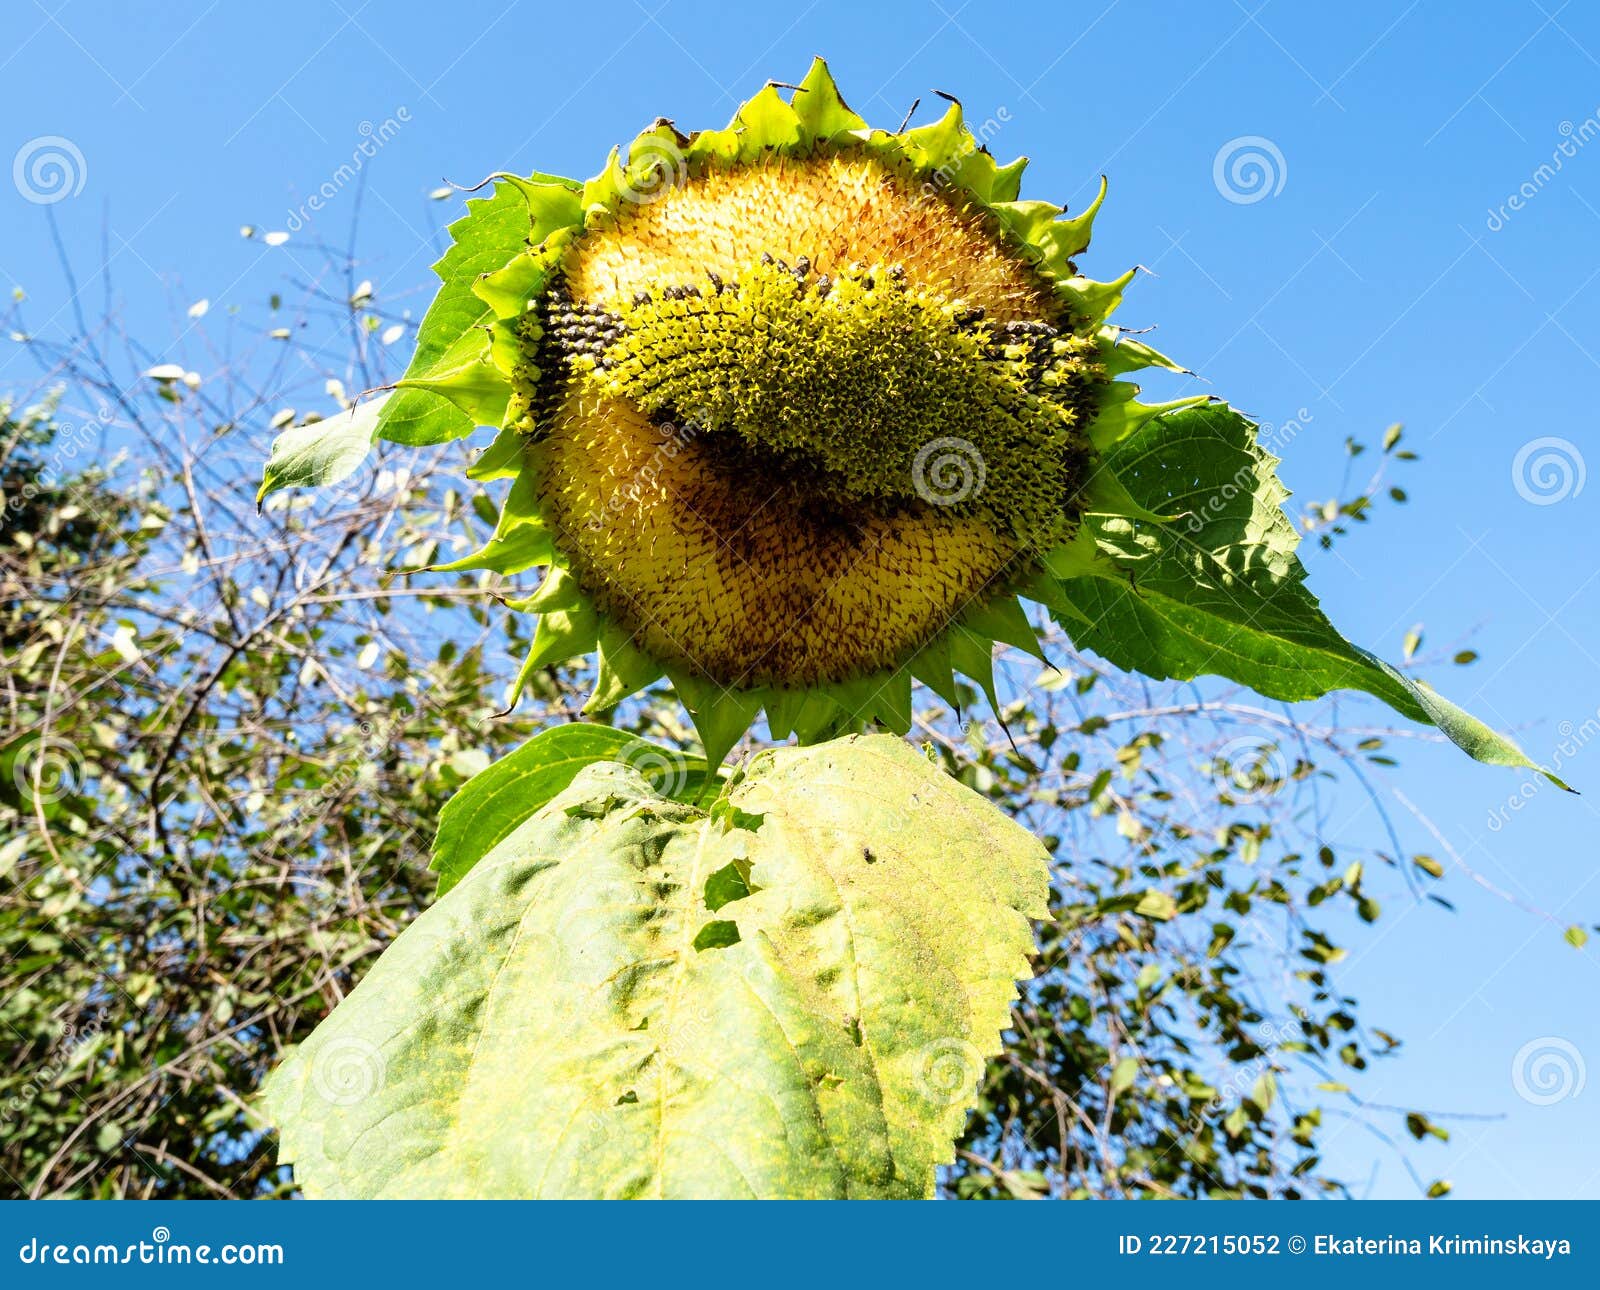 sunflower flower with seeds pecked by sparrows